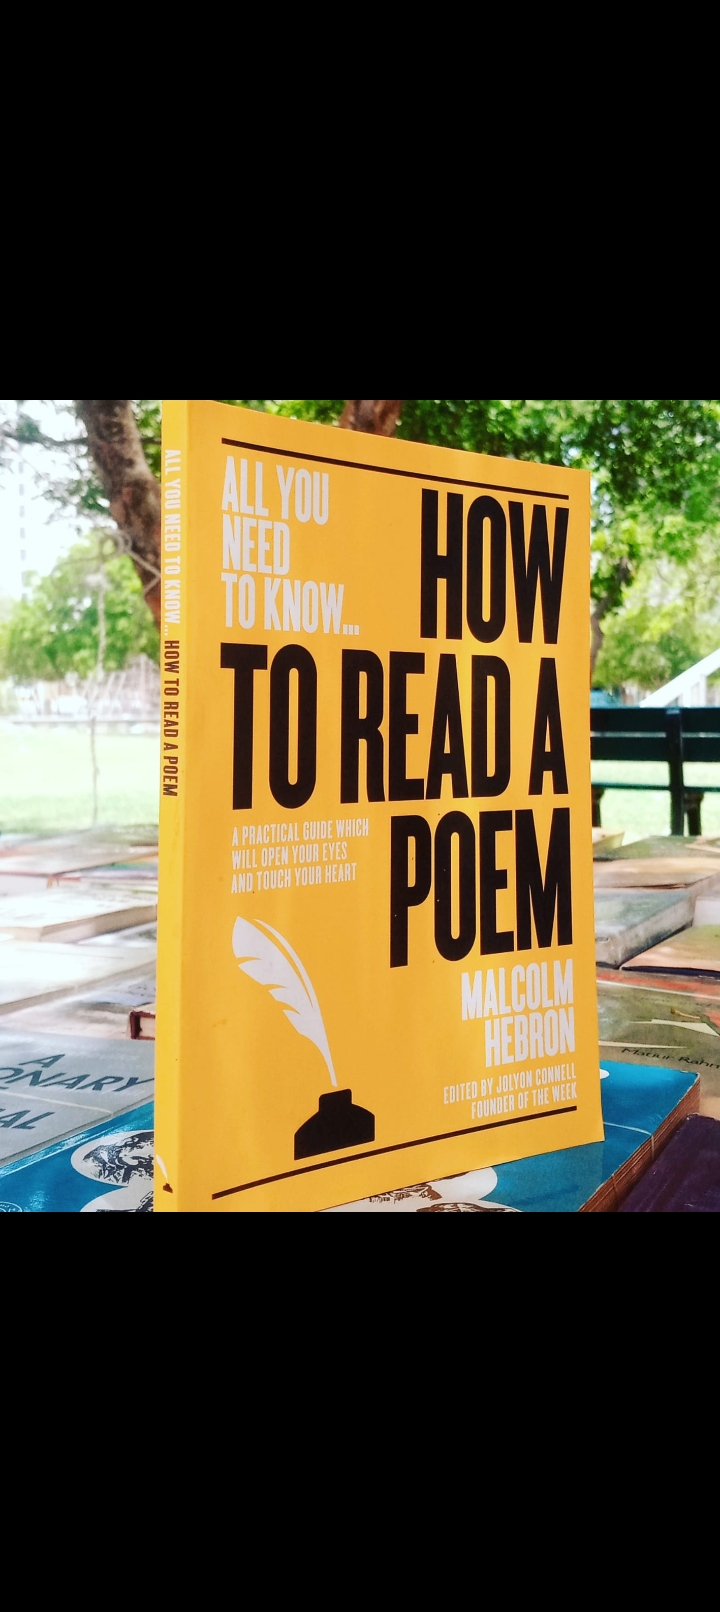 all you need to know how to read a poem by malcolm hebron. original new paperback